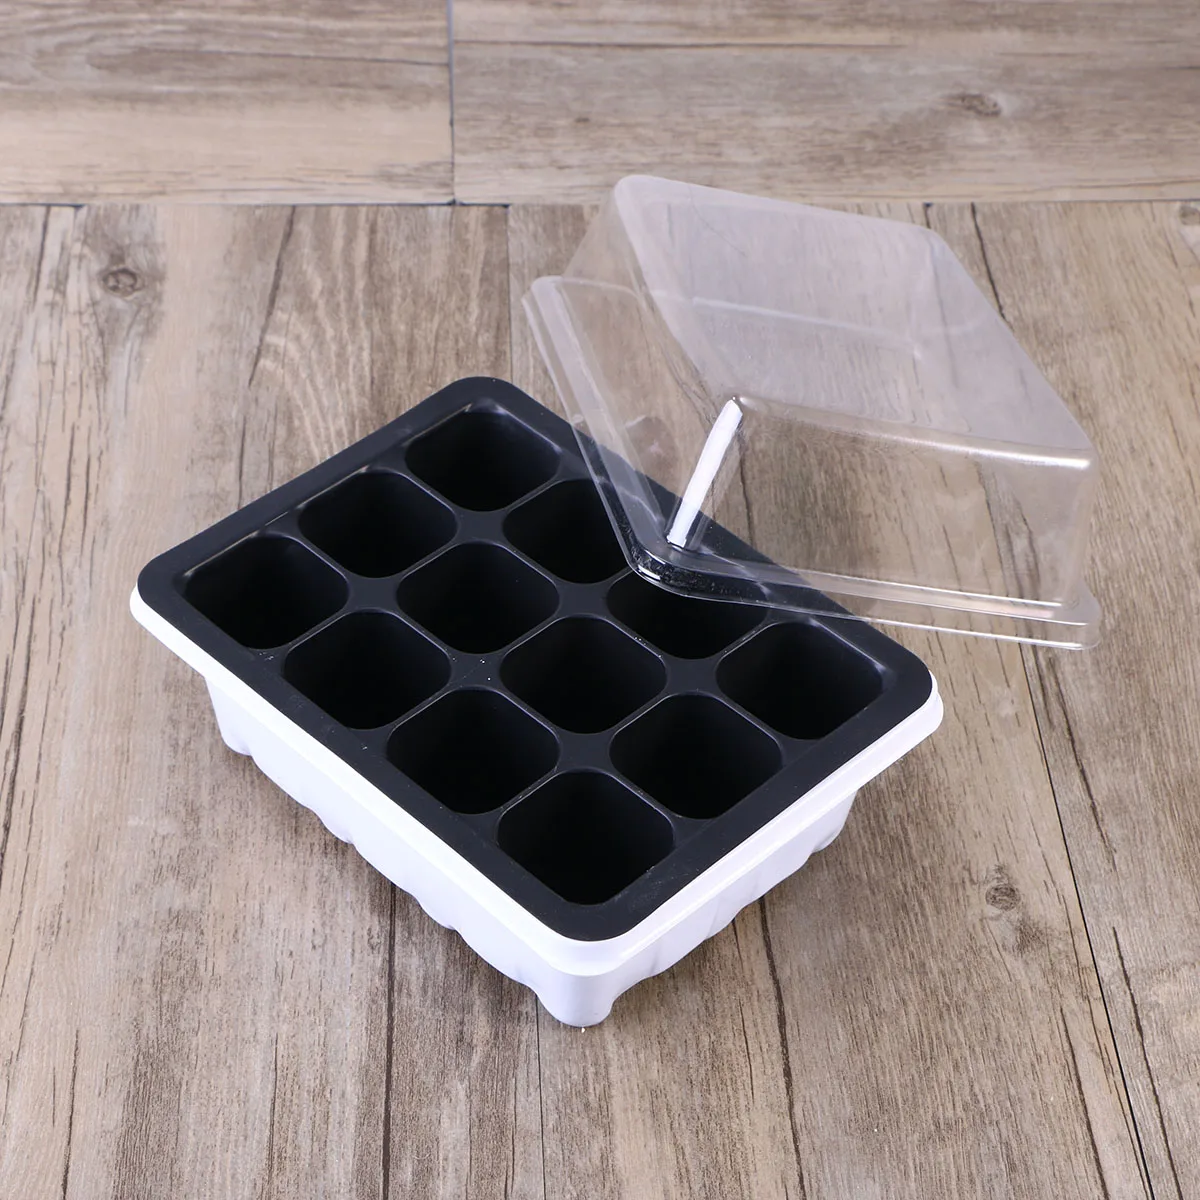 Hpybest 5 Packs Seedling Tray Seed Starter Tray with Dome and Base 12 Cells for Gardening Bonsai Black